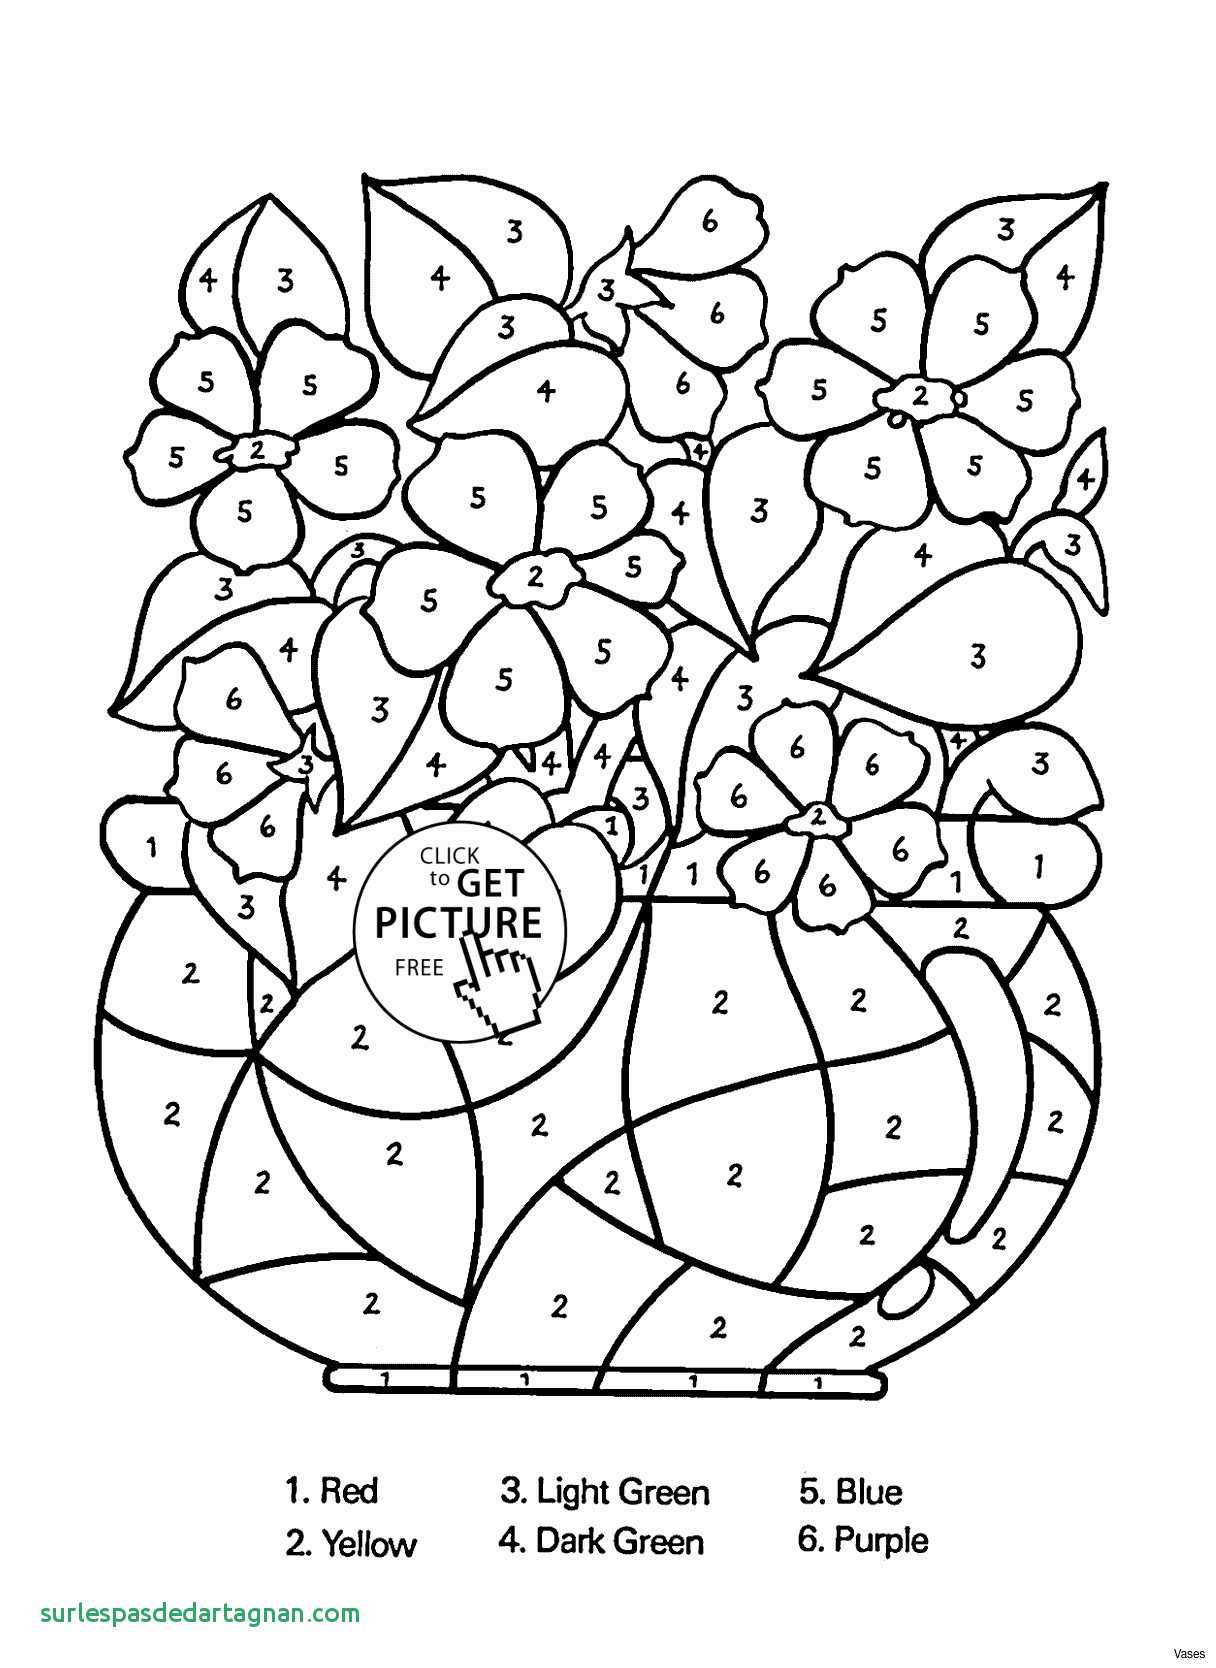 15 Unique Floating Flowers In Vase 2024 free download floating flowers in vase of dot marker coloring pages vases flower vase coloring page pages pertaining to dot marker coloring pages vases flower vase coloring page pages flowers in a top i 0